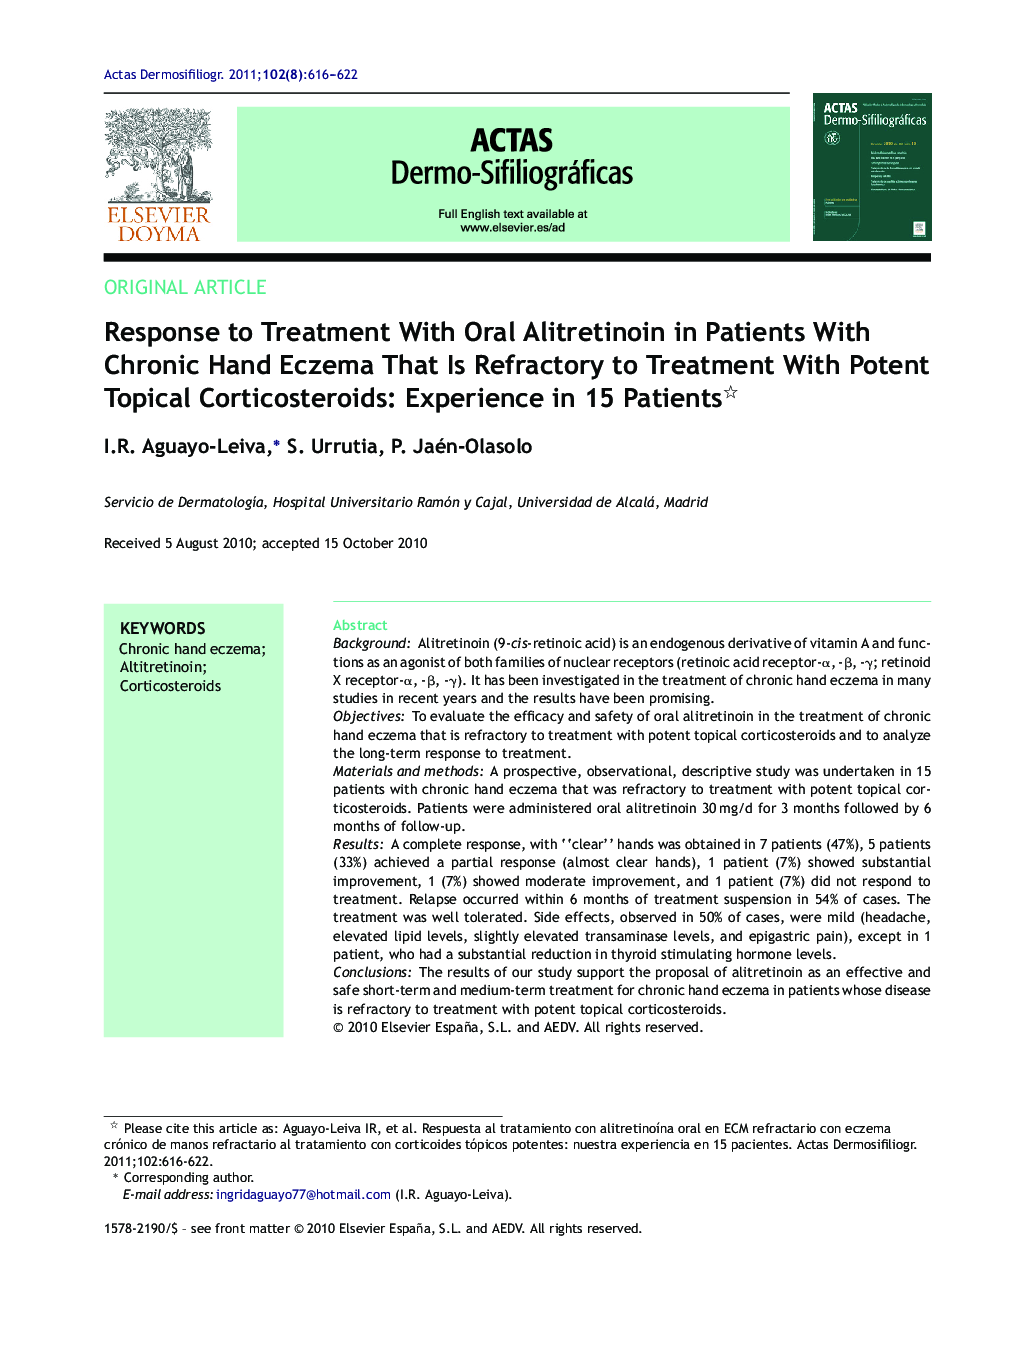 Response to Treatment With Oral Alitretinoin in Patients With Chronic Hand Eczema That Is Refractory to Treatment With Potent Topical Corticosteroids: Experience in 15 Patients 